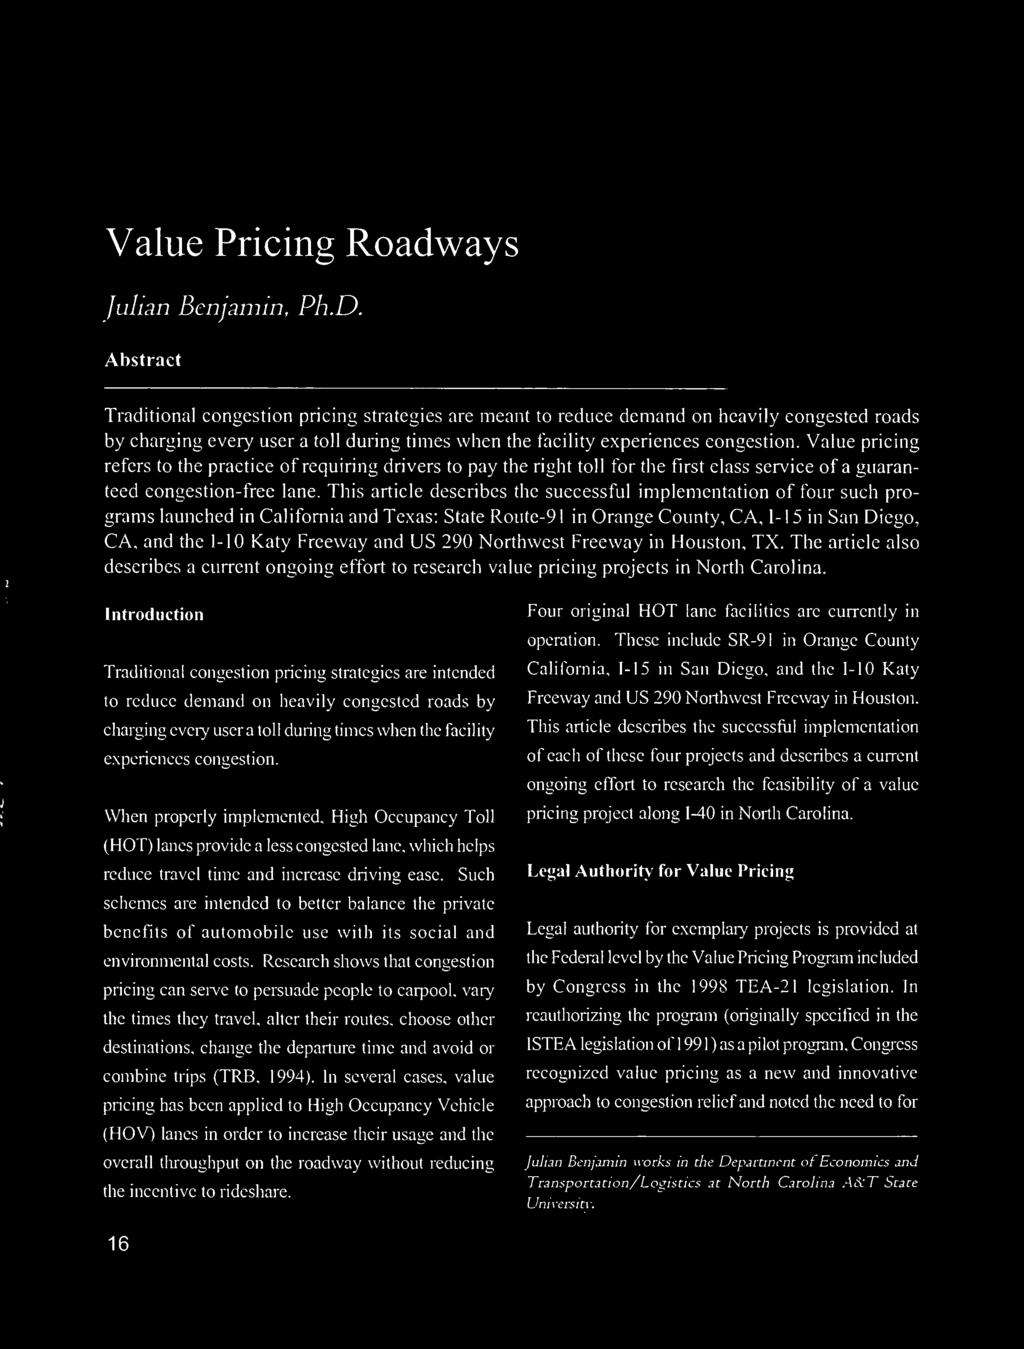 Value pricing refers to the practice of requiring drivers to pay the right toll for the first class service of a guaranteed congestion-free lane.